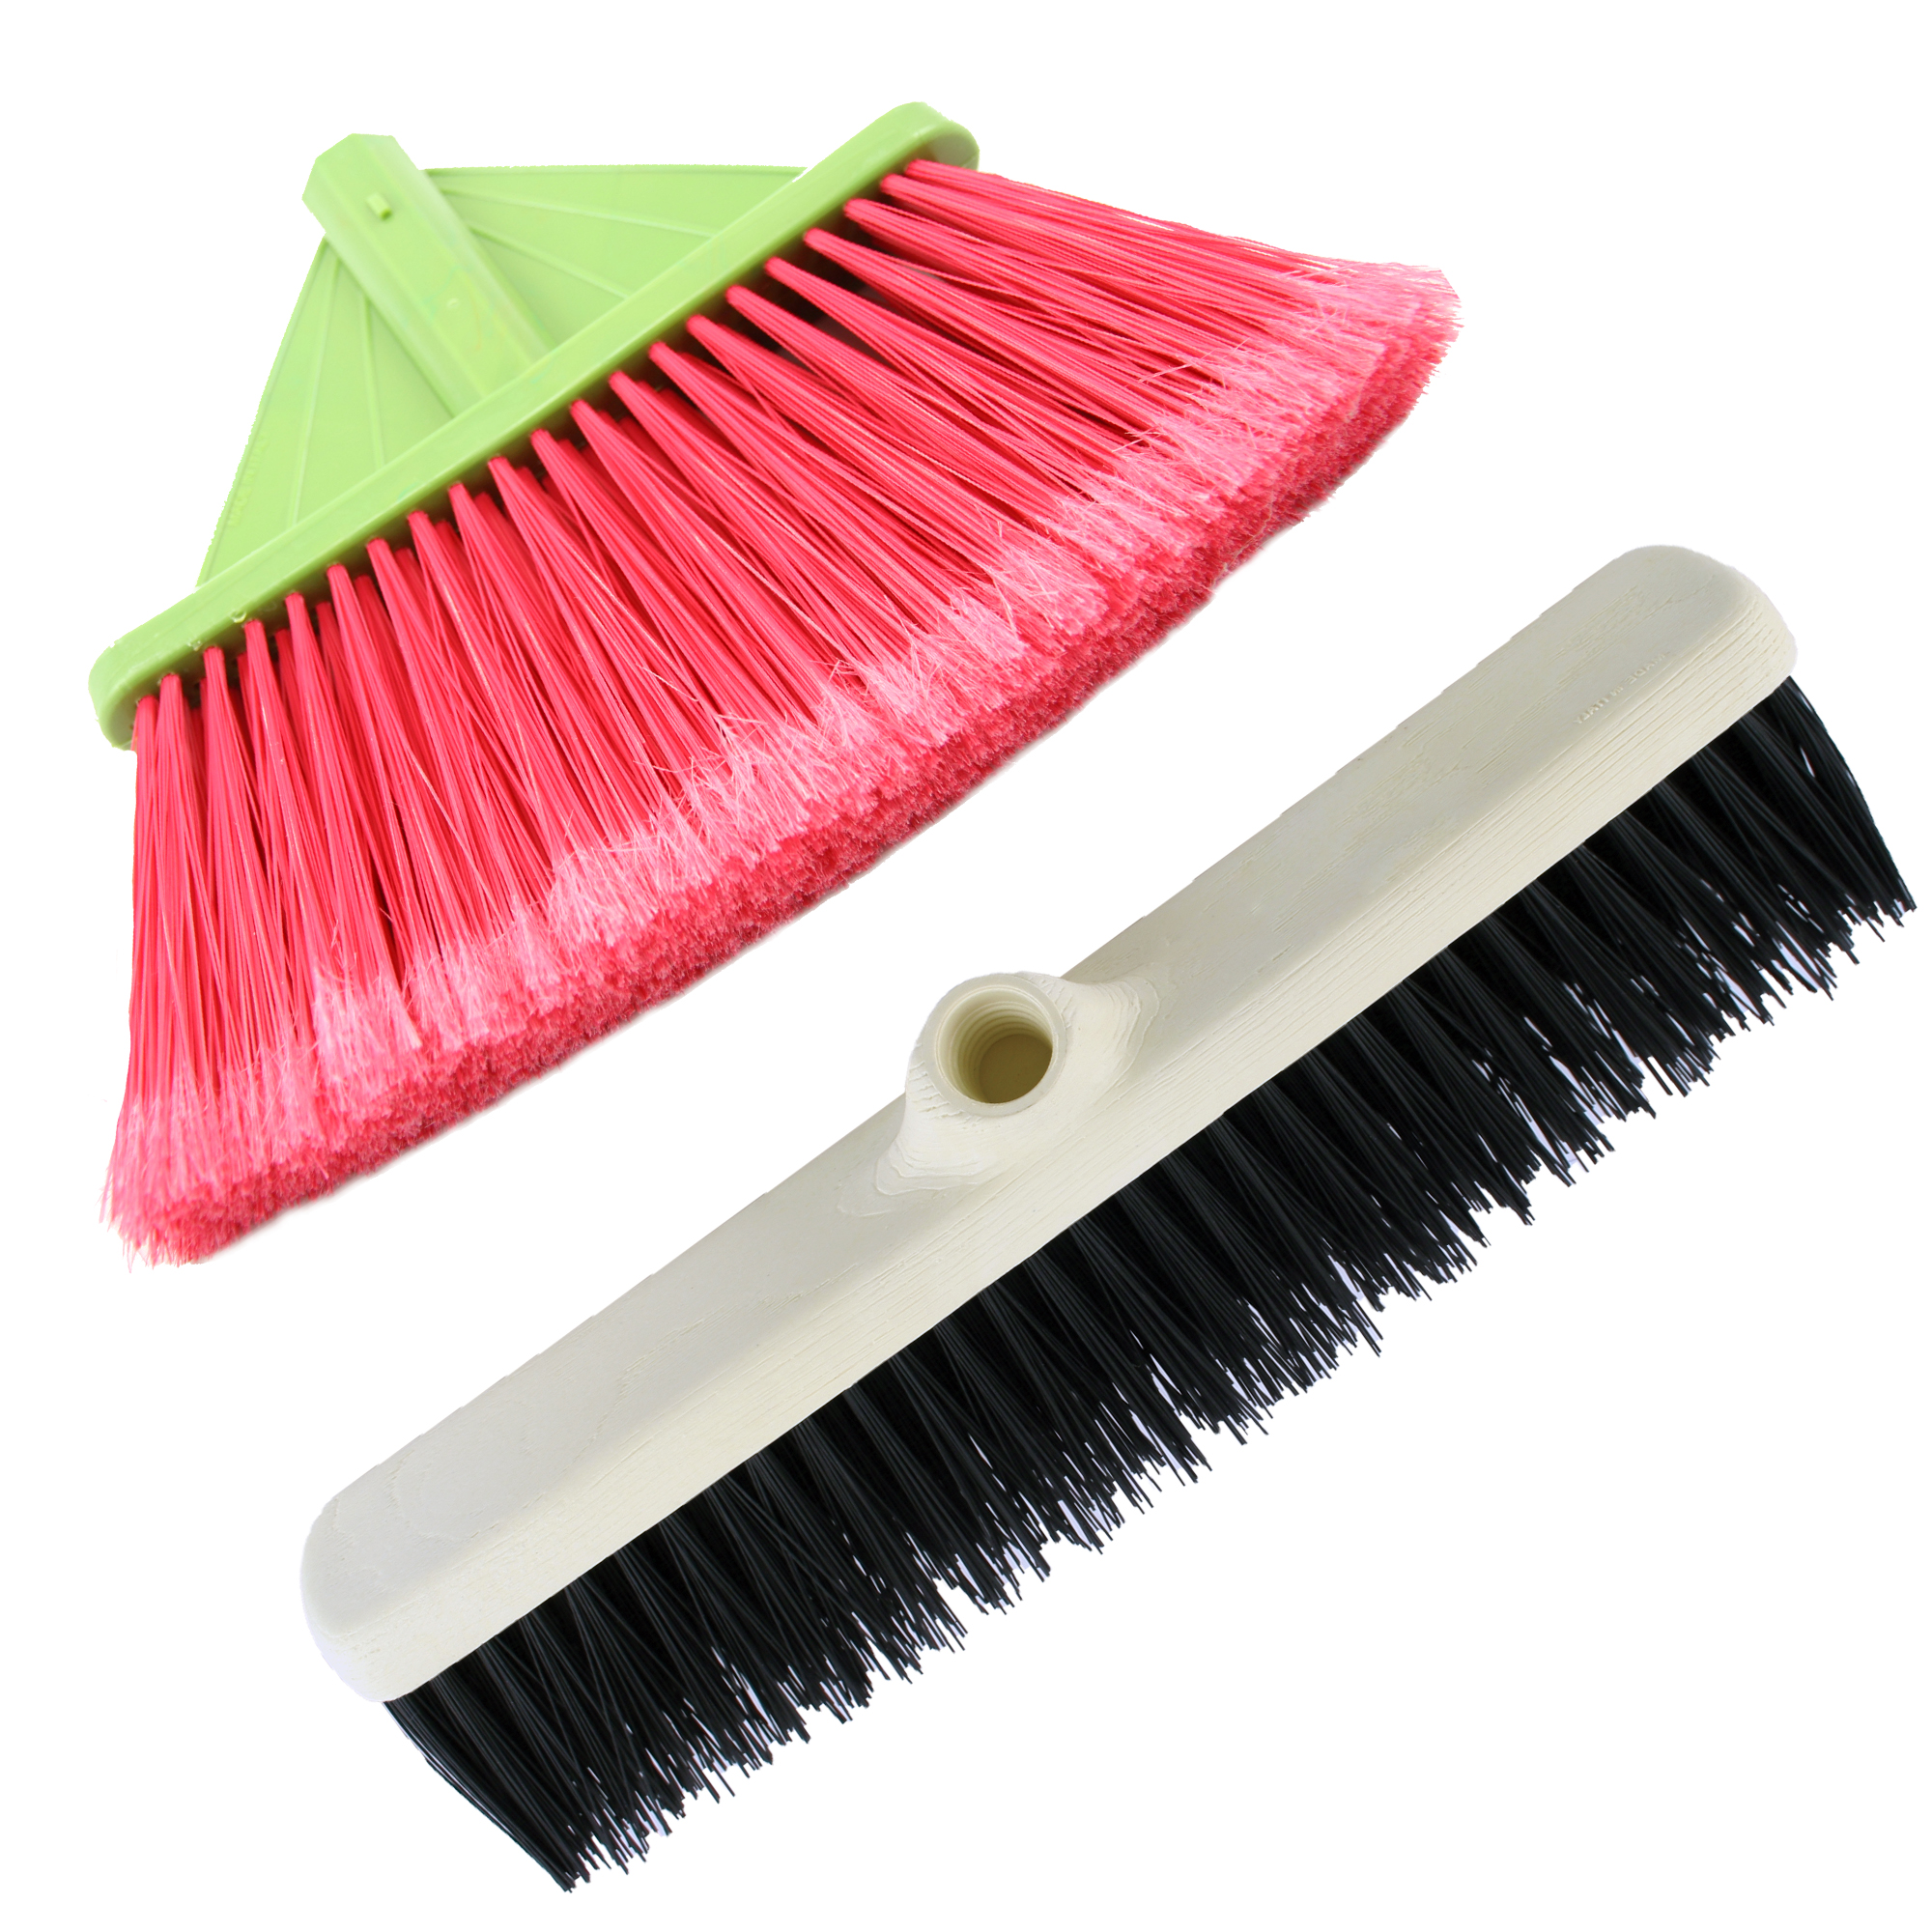 Cleaning and Housekeeping/BROOMS, MOPS, DUST PANS, BRUSHES/Plastic Brooms